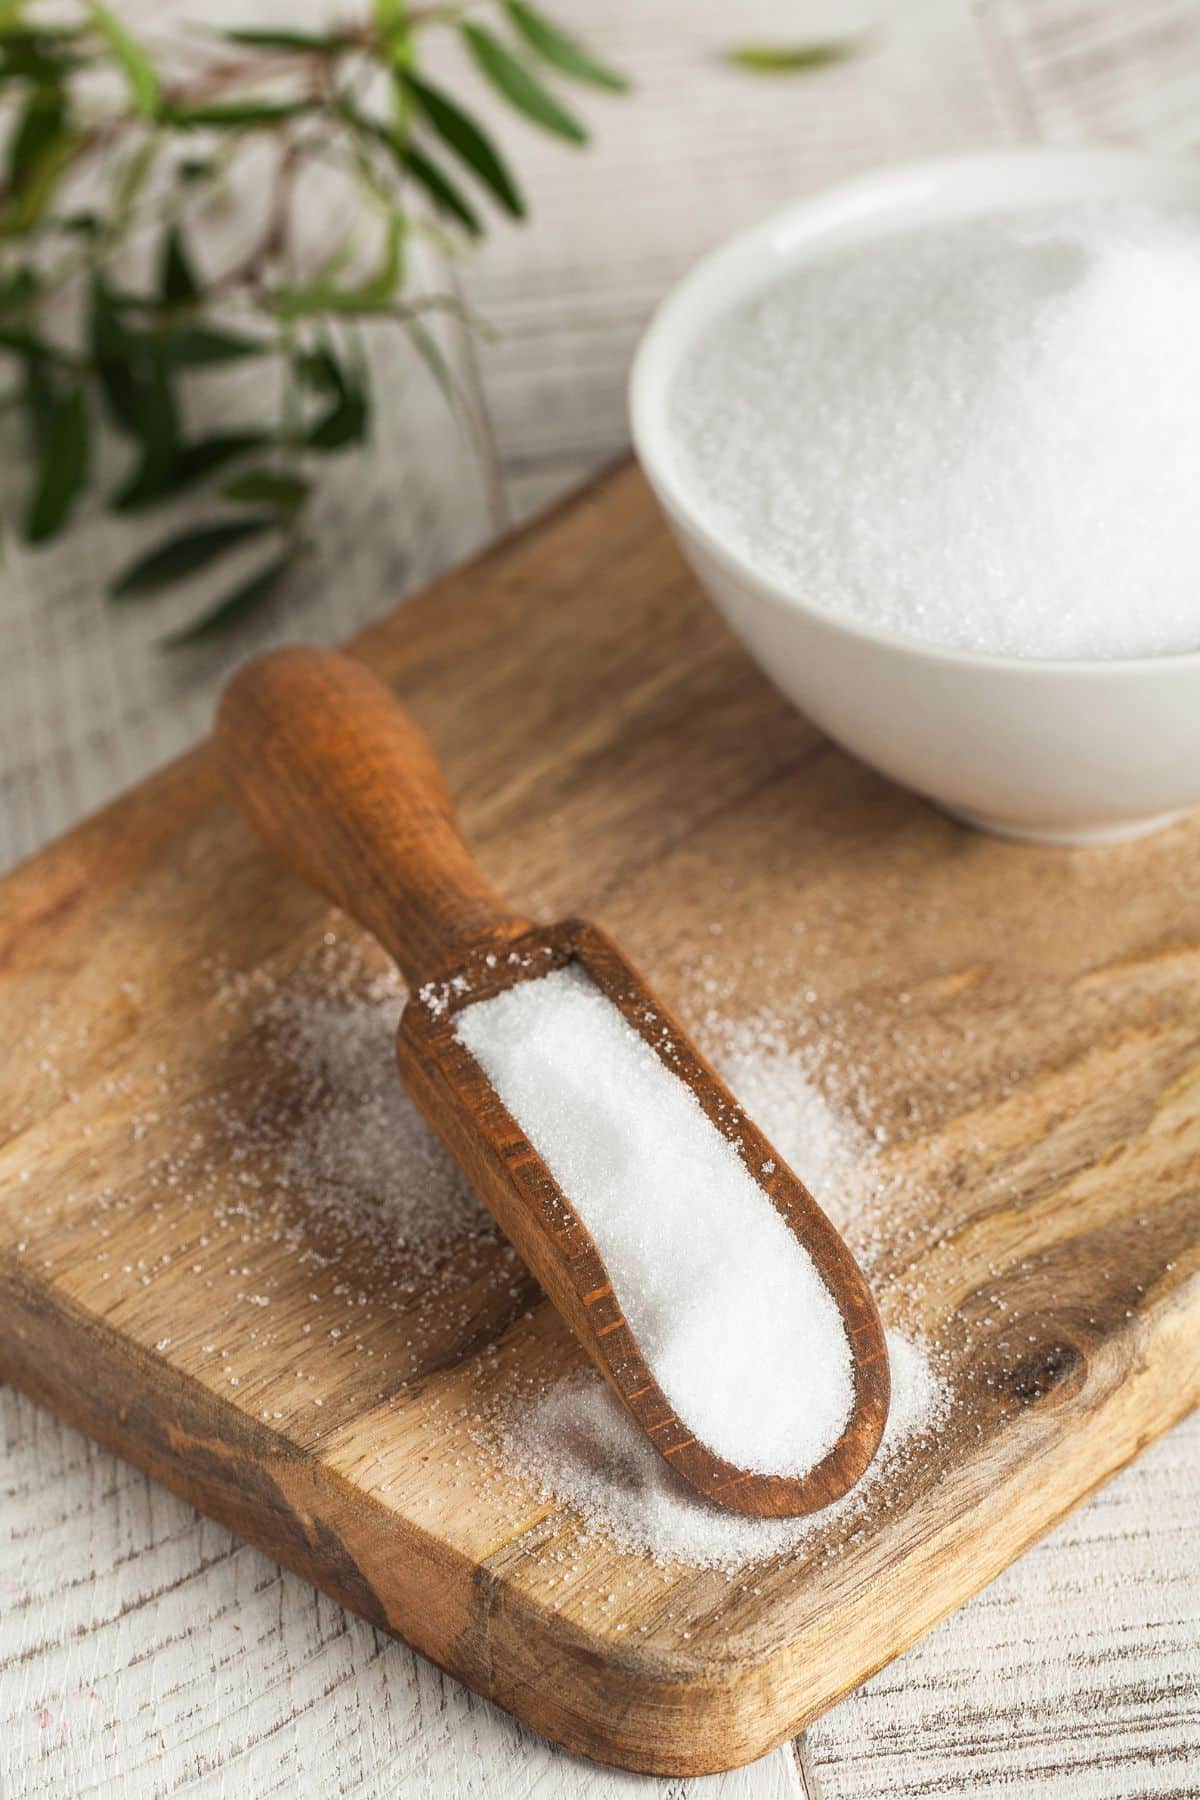 erythritol in a wooden scoop.